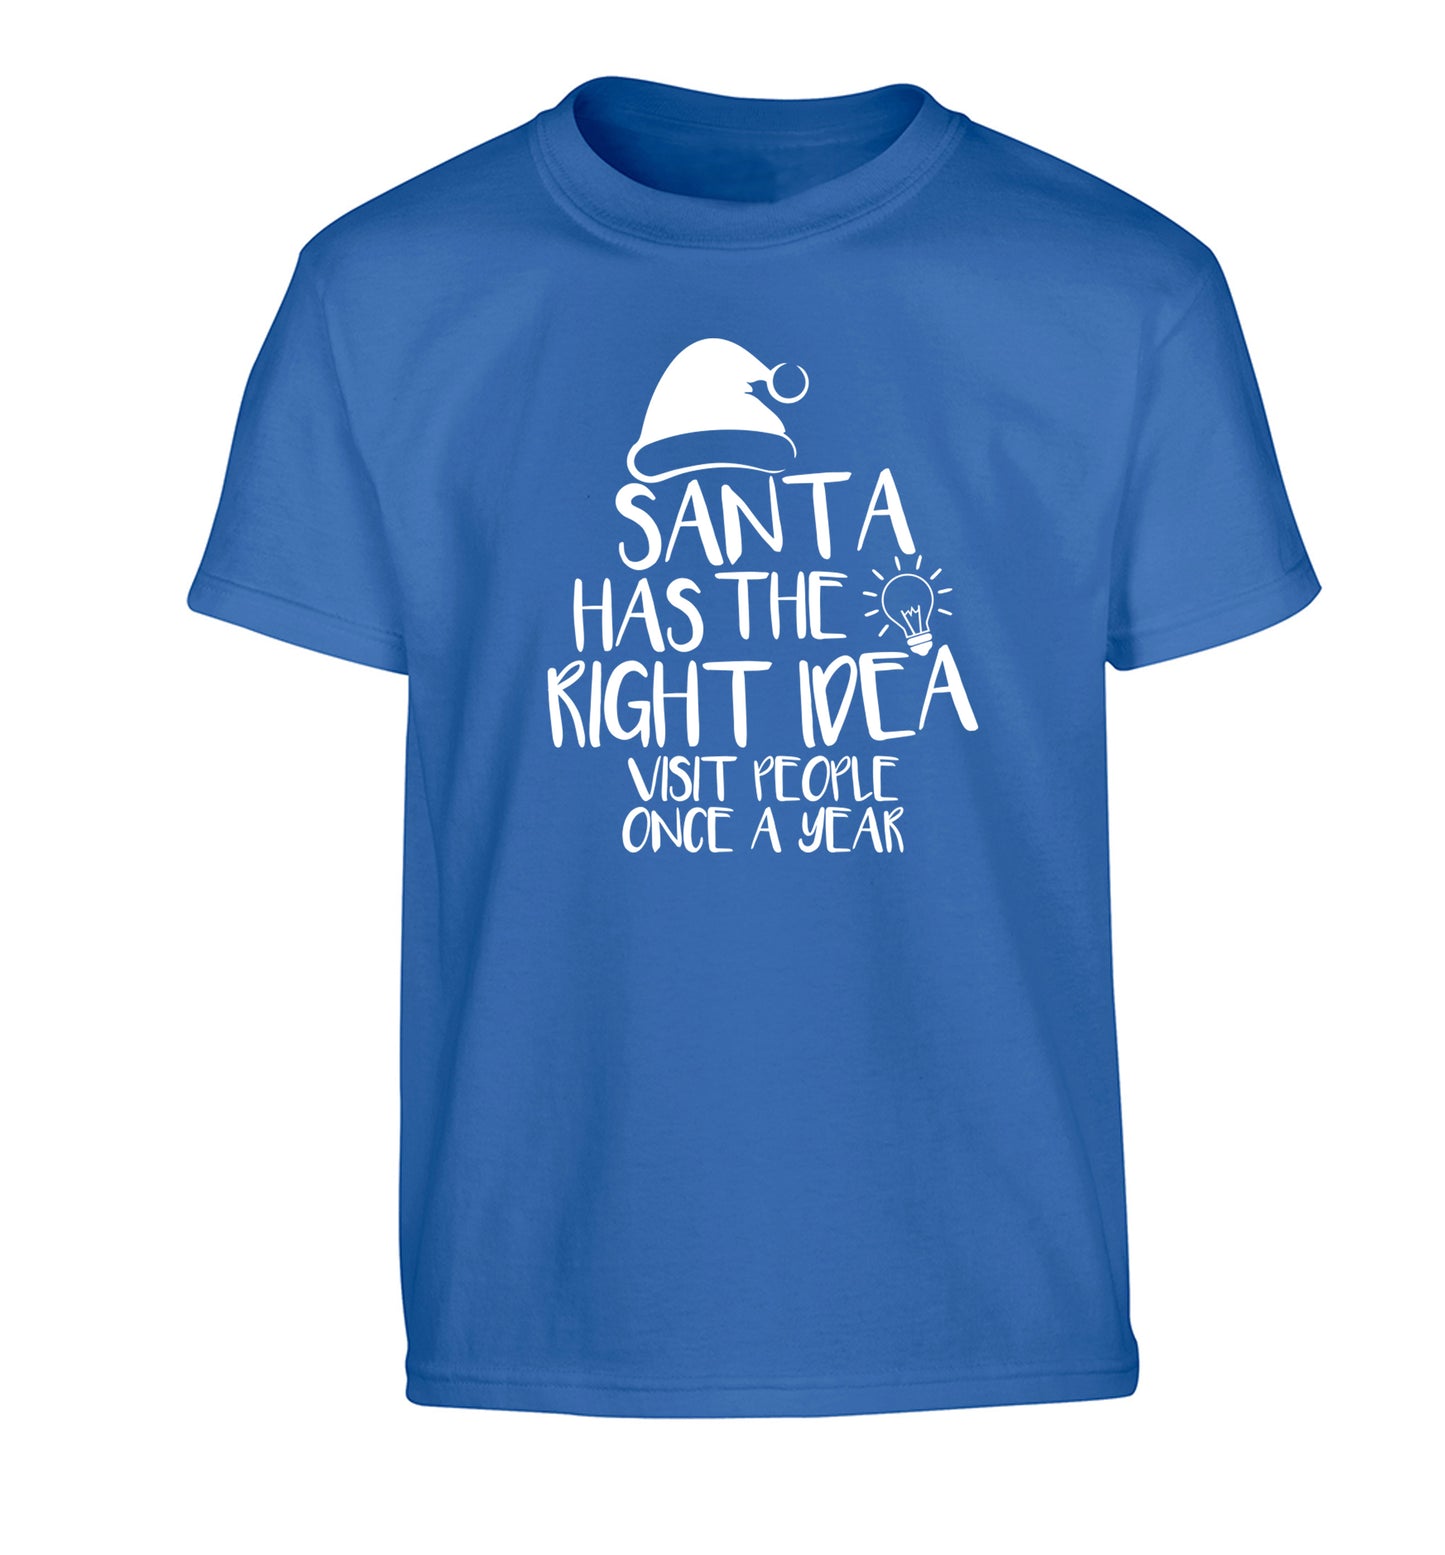 Santa has the right idea visit people once a year Children's blue Tshirt 12-14 Years